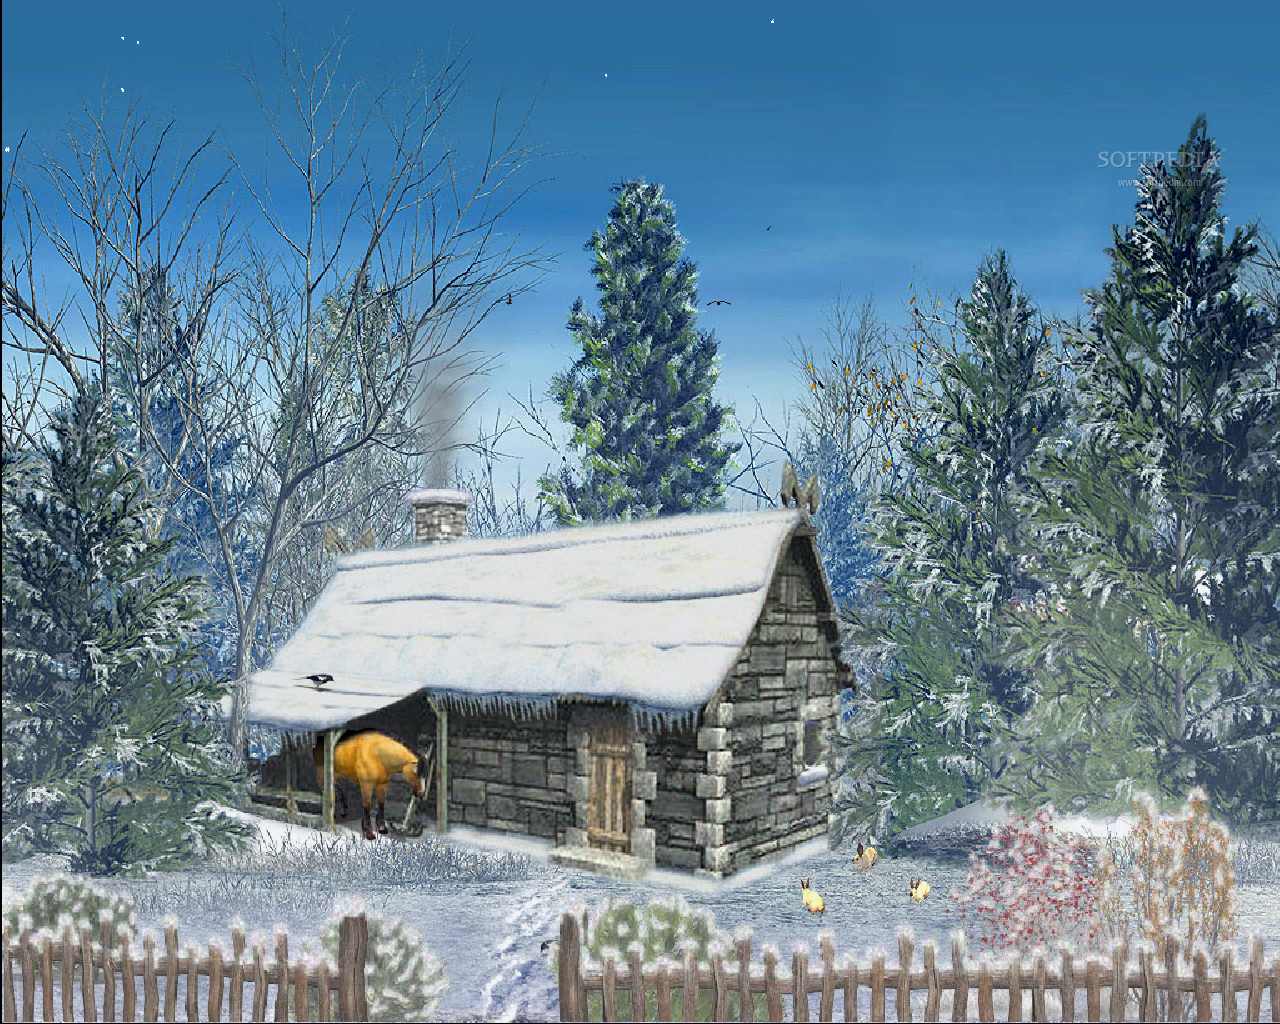 Snowy Hut Animated Screensaver This Is The Image Displayed By